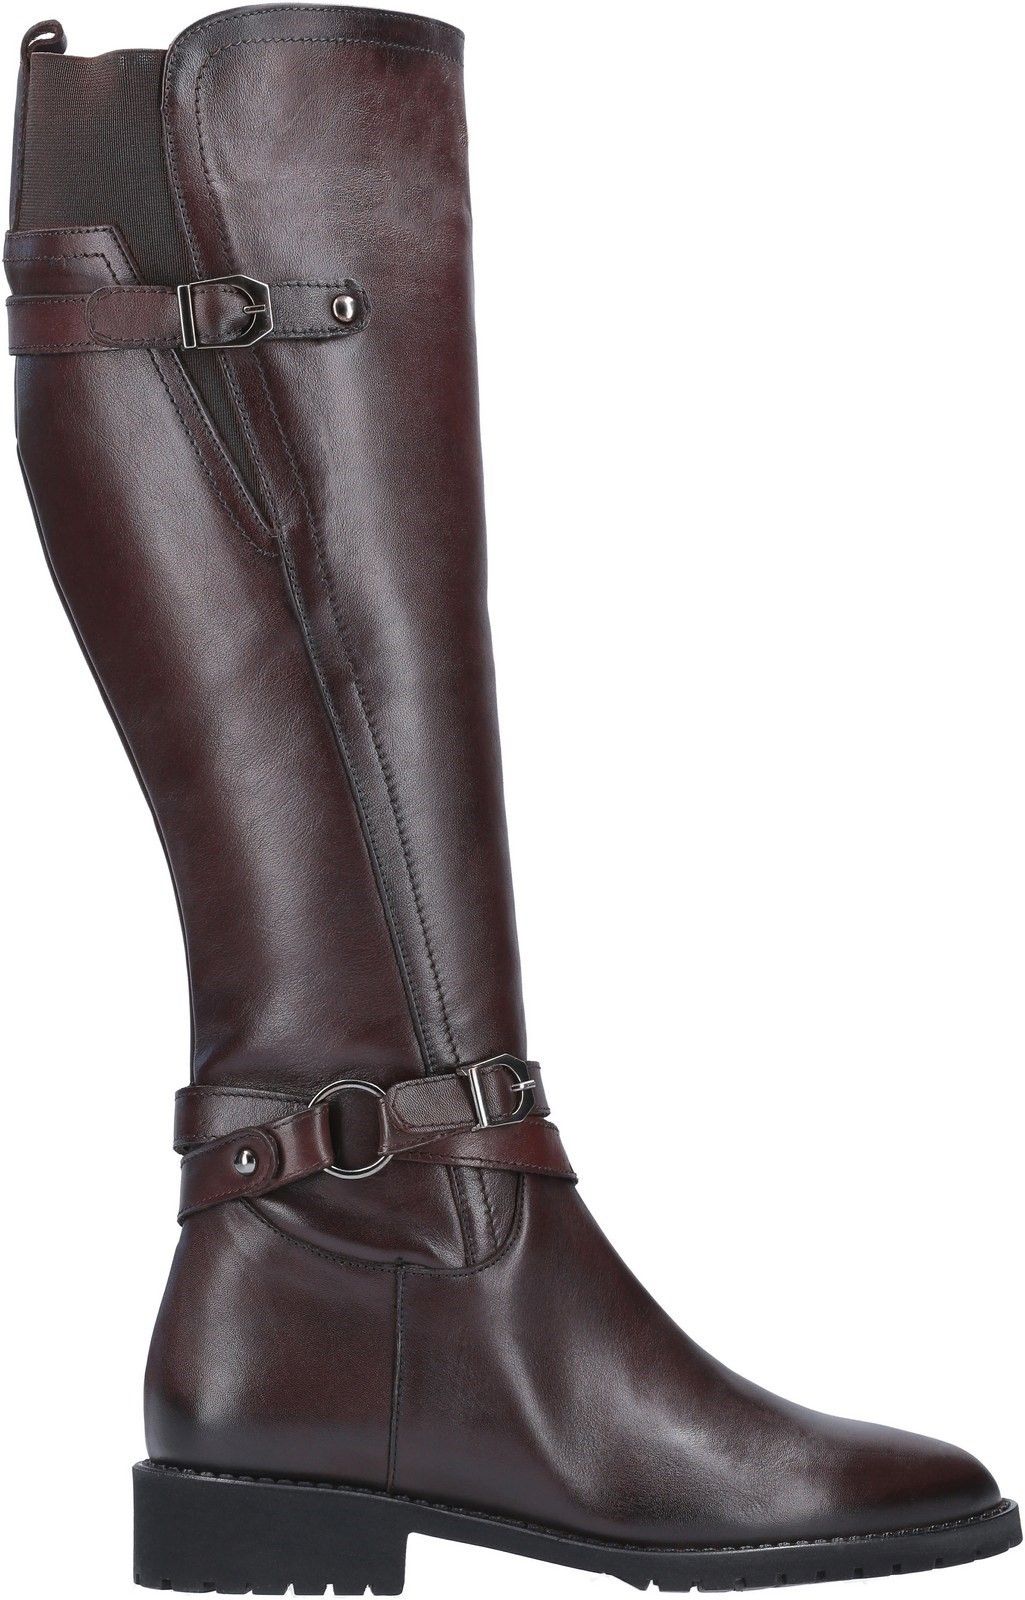 Athens from Riva is a chic, stand out long boot for the autumn/winter season. Its soft, leather uppers with decorative buckle detailing gives a stylish look. It also has a full side zip and rear elasticated panel for easy on and off and block heel. Soft Leather. 
Buckle Detailing. 
Full Side Zip. 
Rear Pull Loop. 
Block Heel.